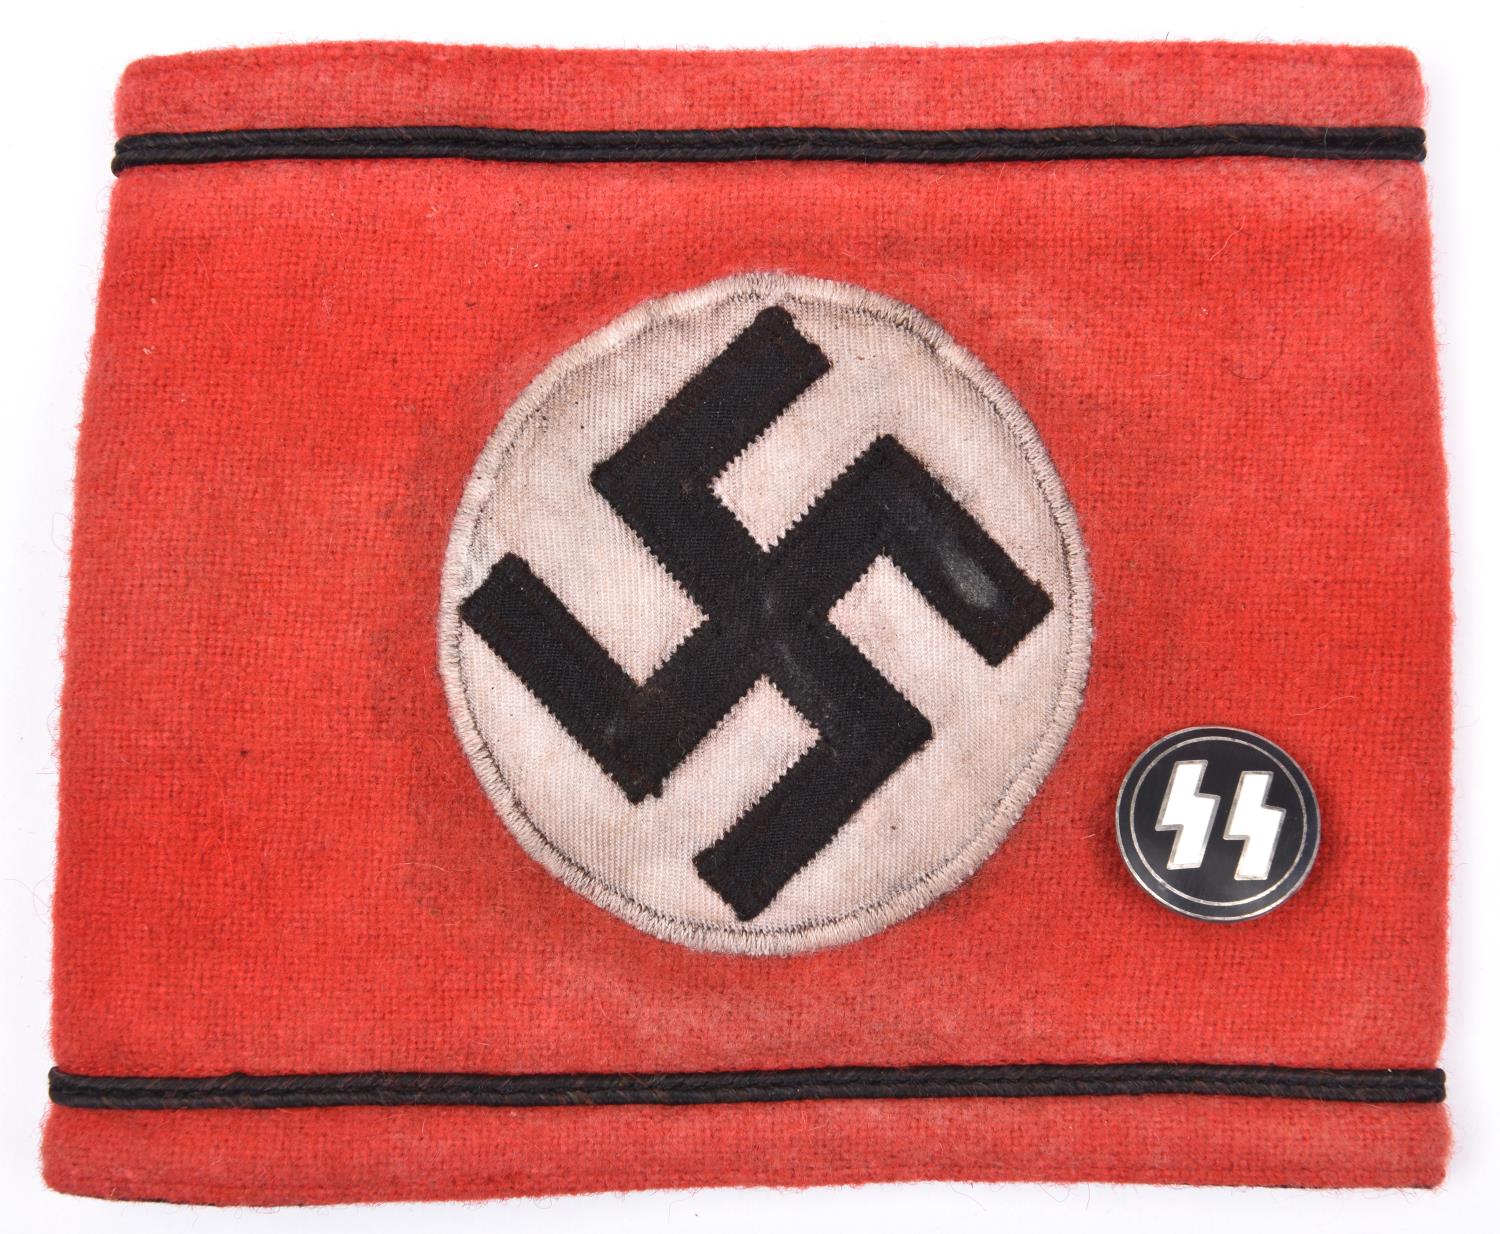 A Third Reich SS Allgemeine arm band, embroidered piping and swastika panel, metal securing